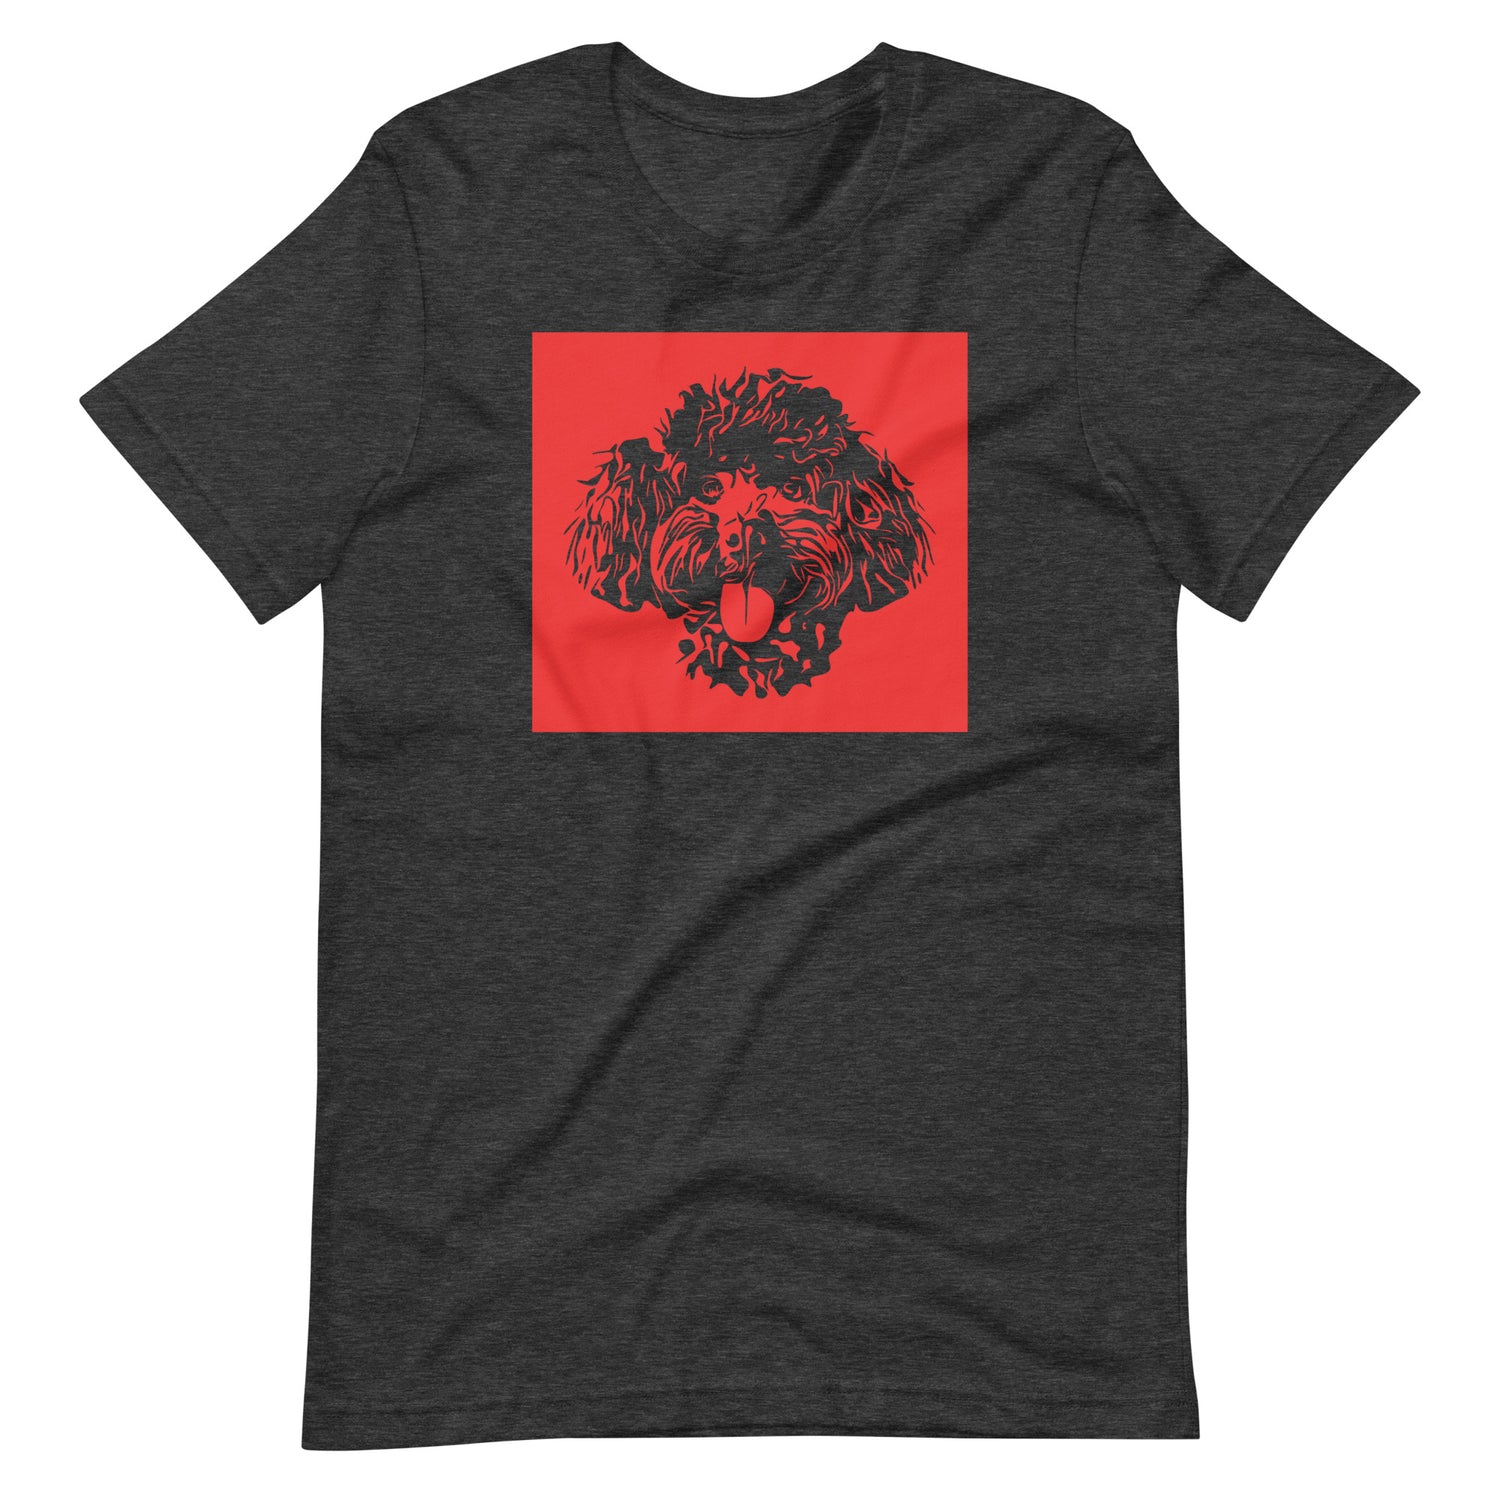 Toy Poodle face silhouette with red background square on unisex dark grey heather t-shirt